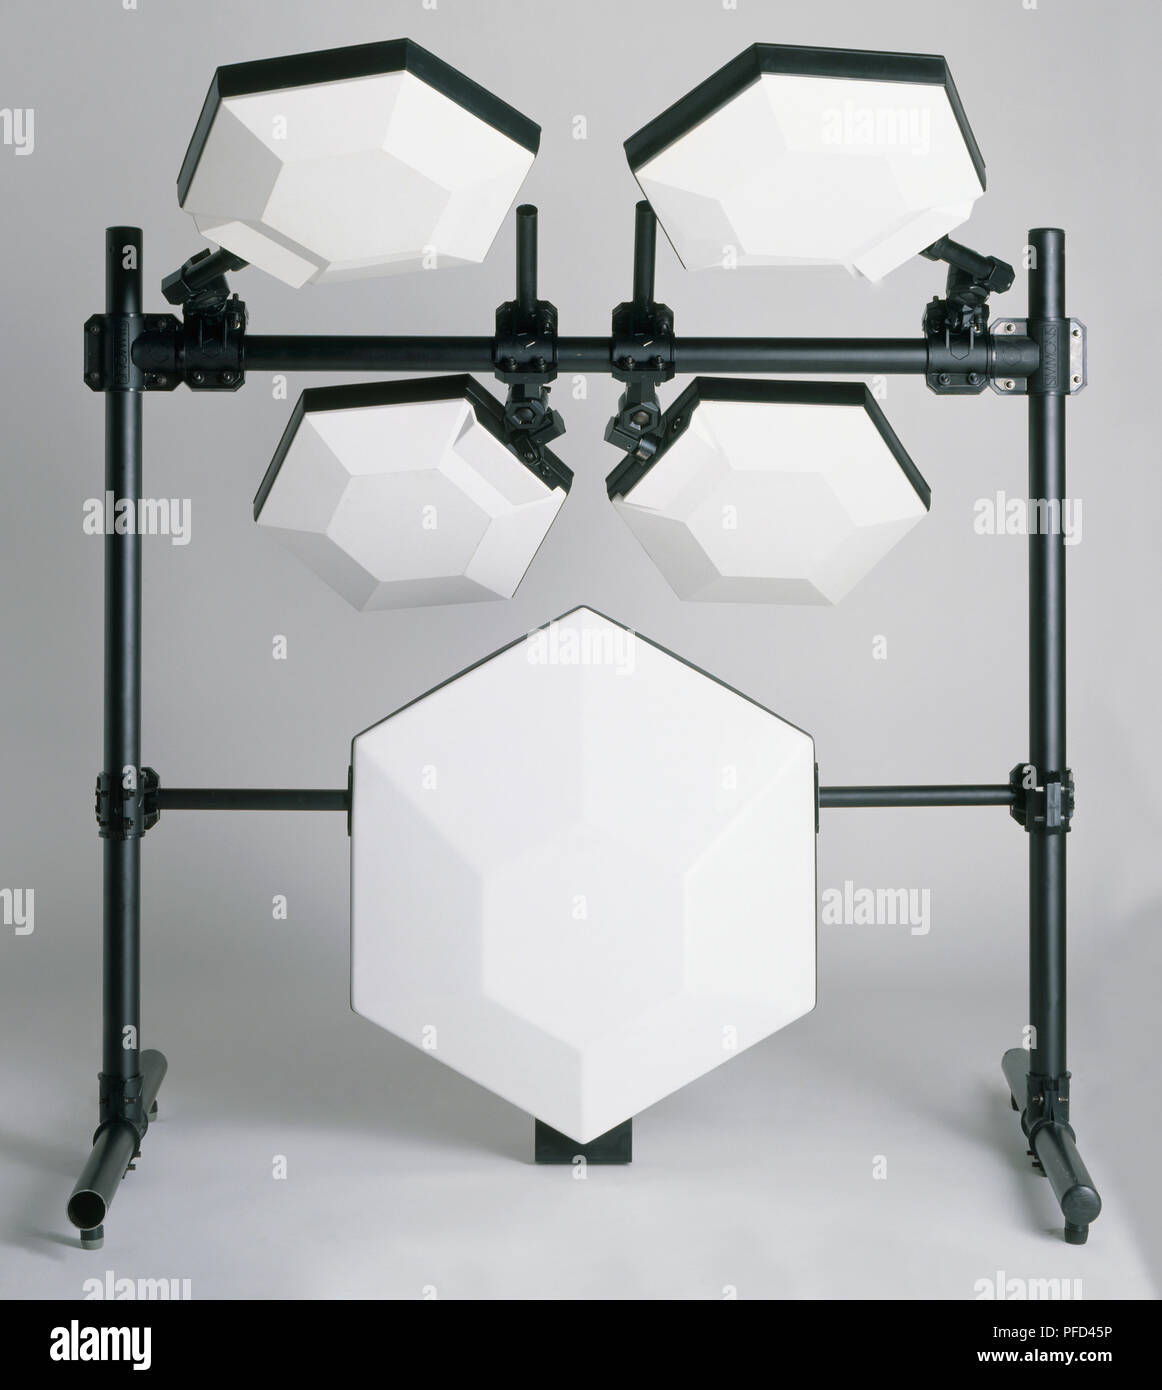 Simmons electronic drum kit consisting of five hexagonal drum pads,  close-up Stock Photo - Alamy